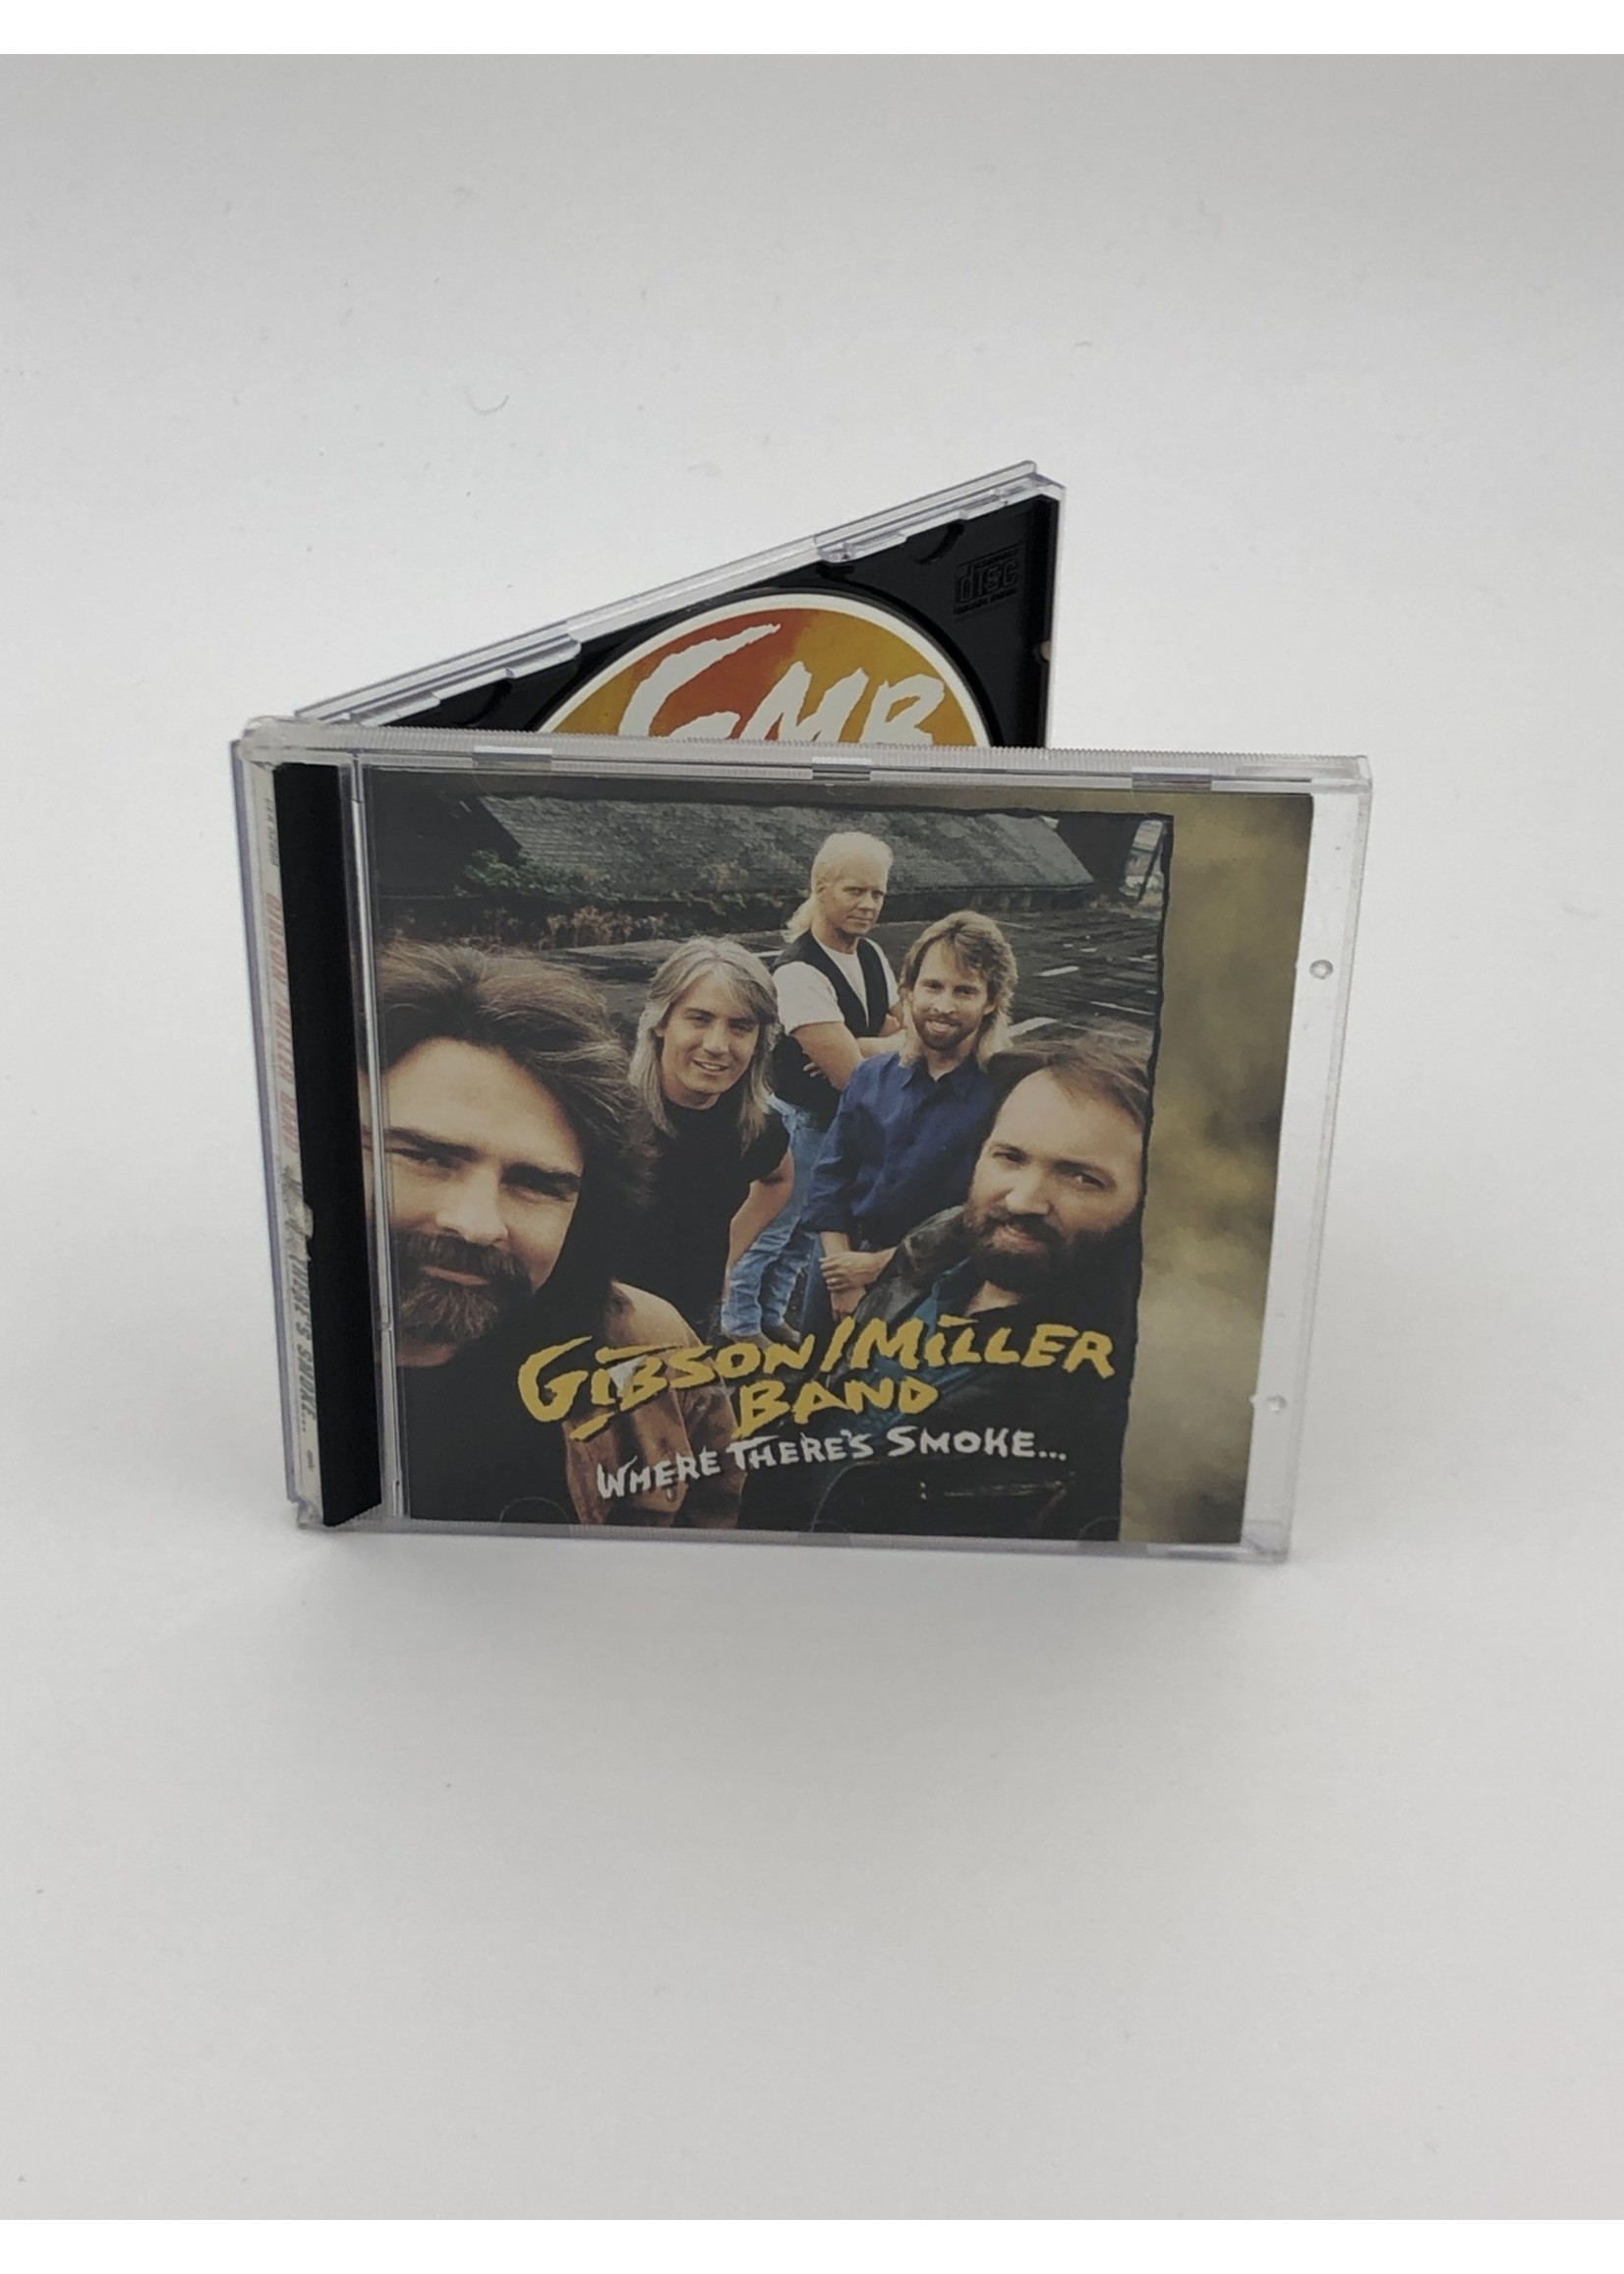 CD Gibson Miller Band: Where There's Smoke CD